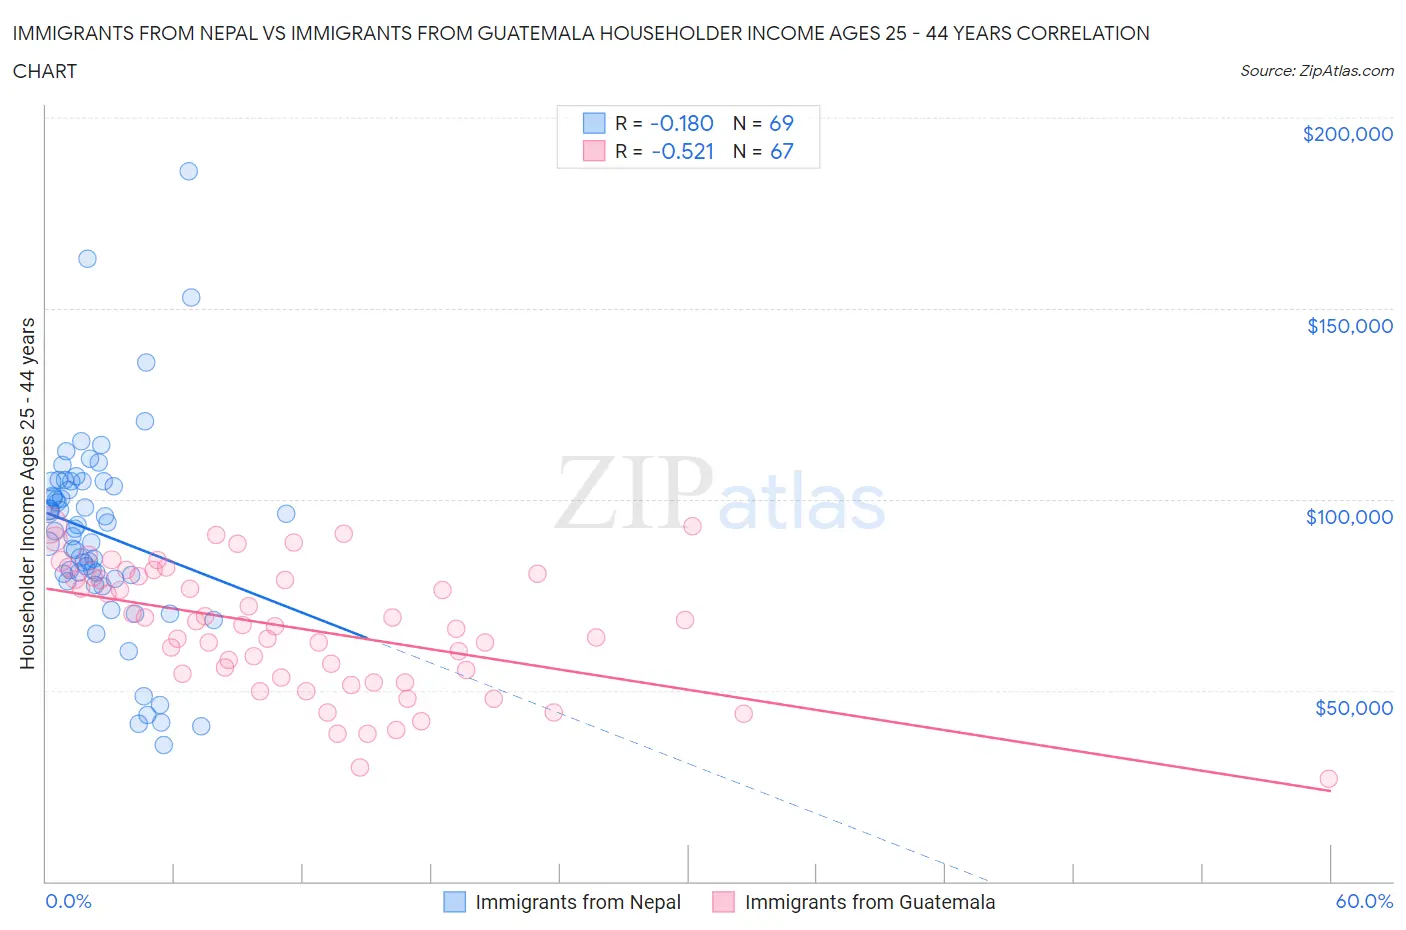 Immigrants from Nepal vs Immigrants from Guatemala Householder Income Ages 25 - 44 years